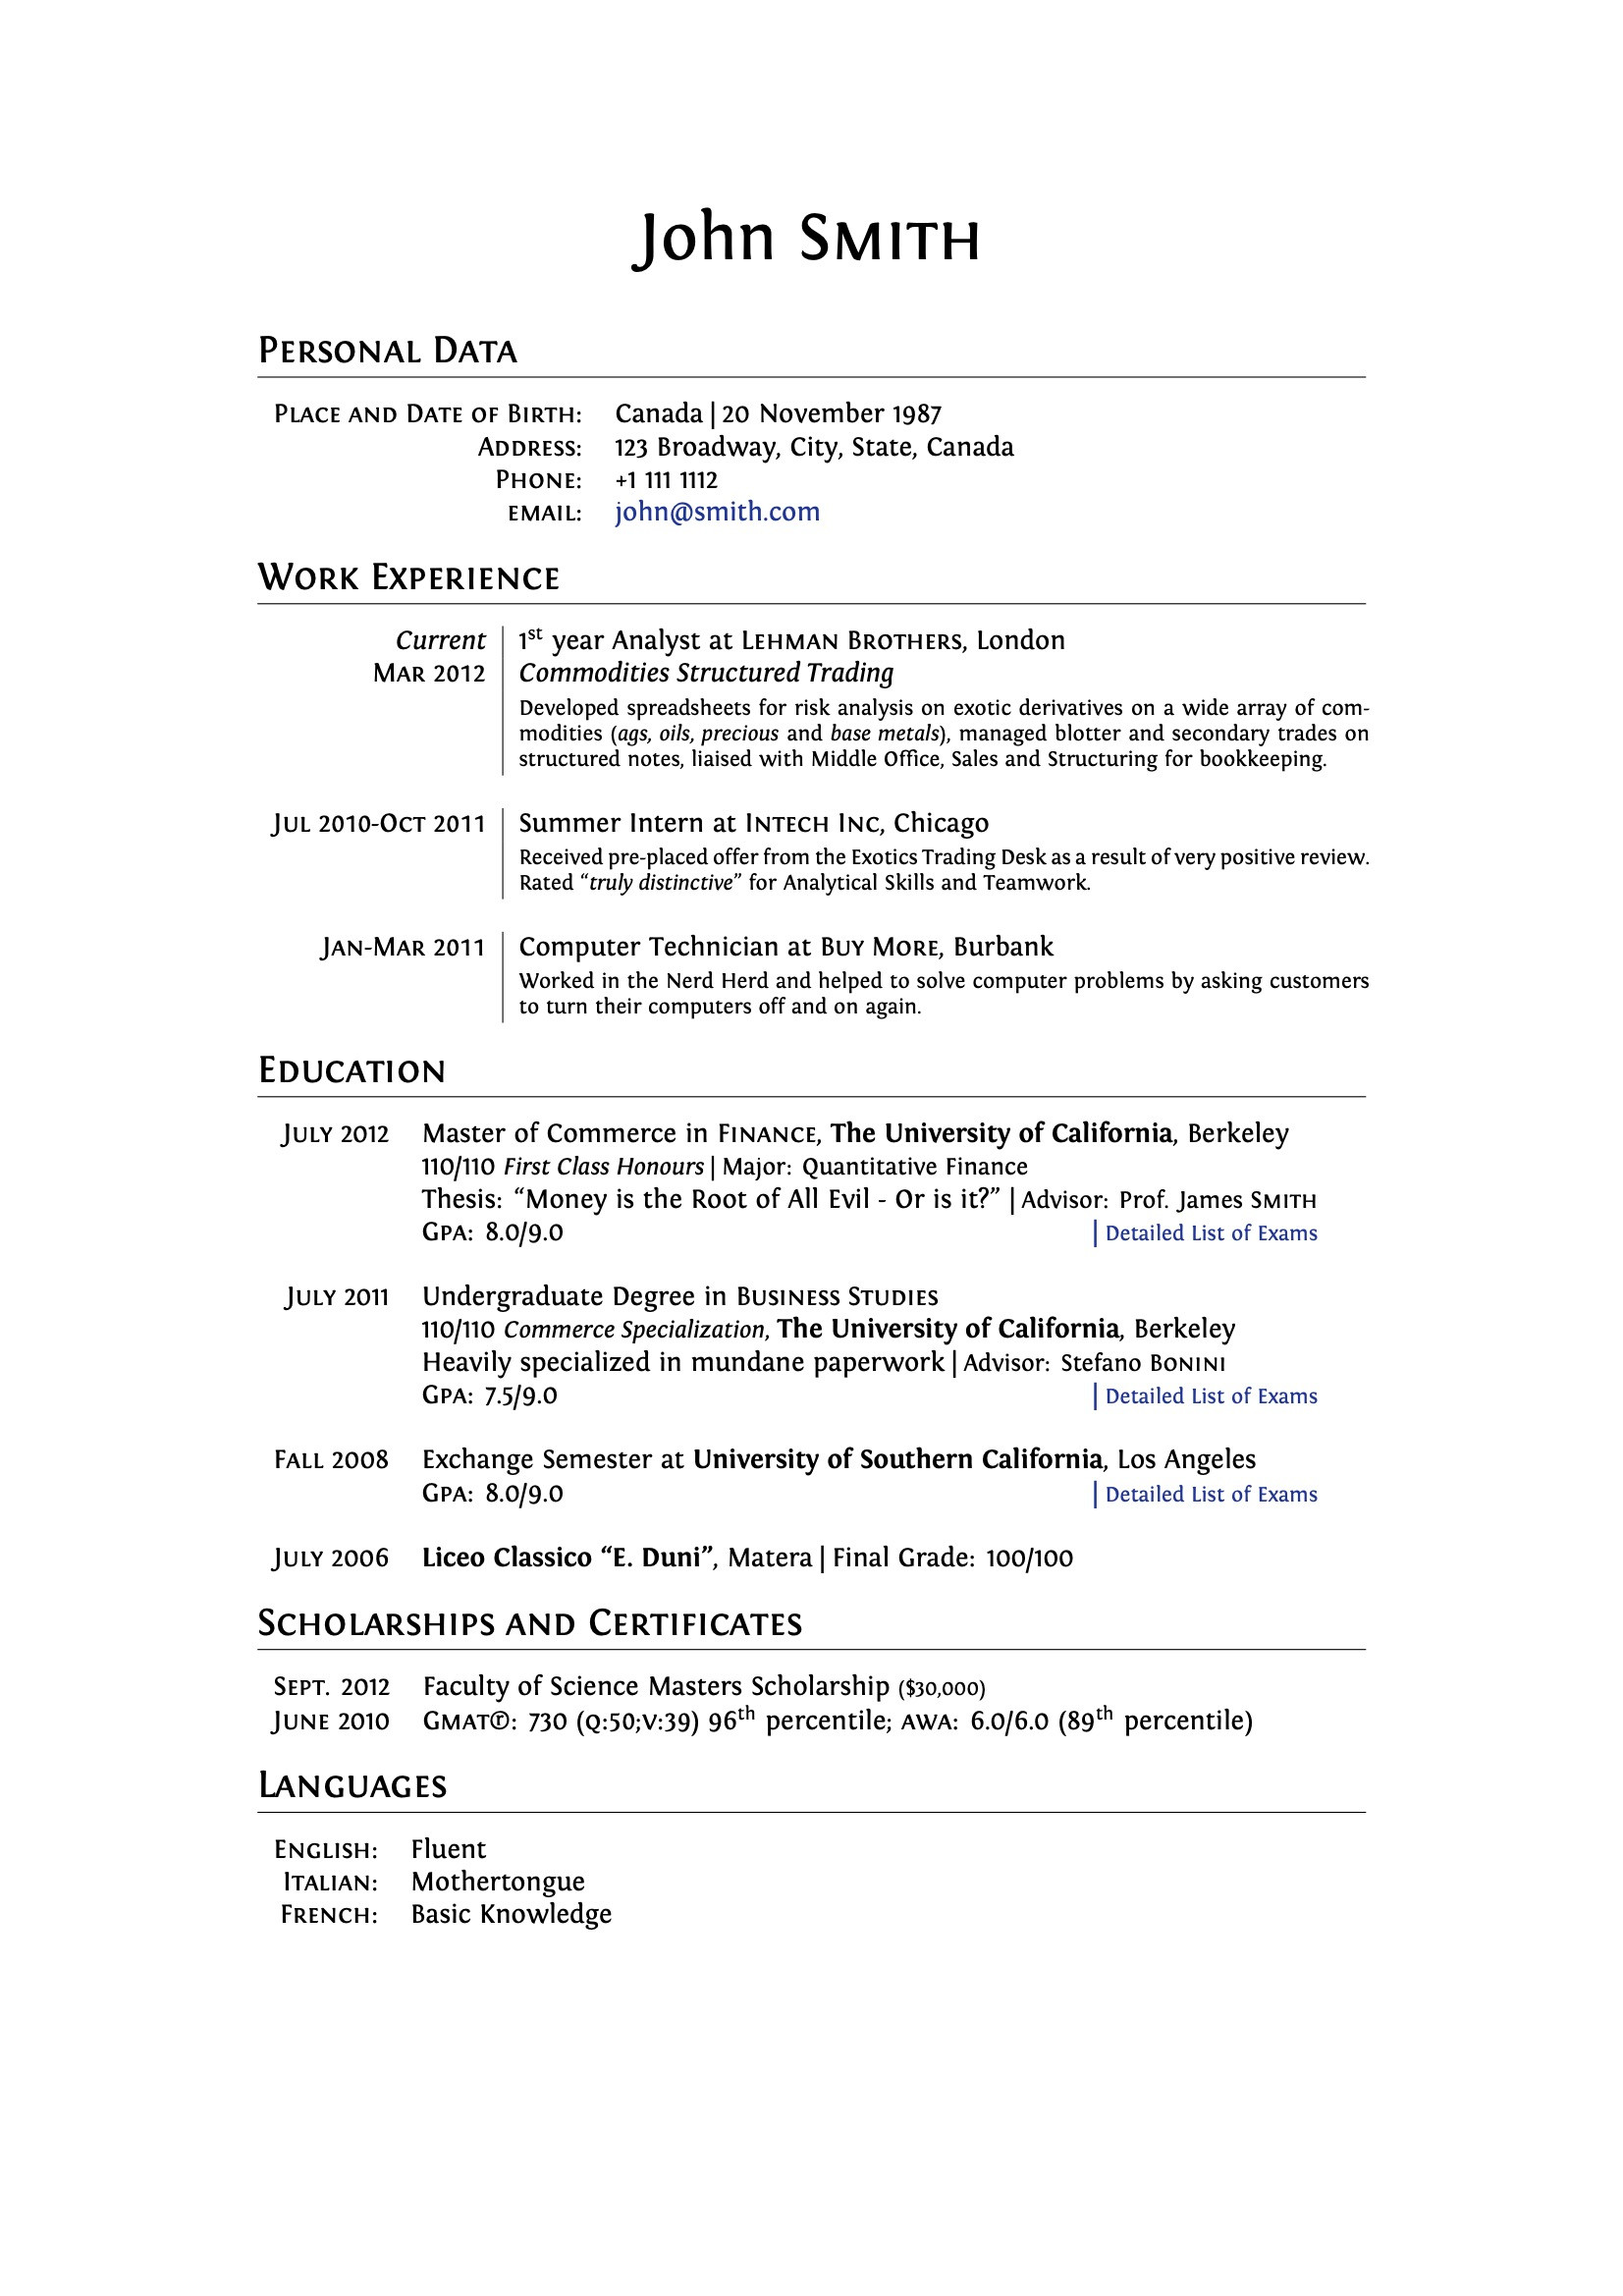 Resume for Masters Degree Application Samples Latex Templates – Cvs and Resumes